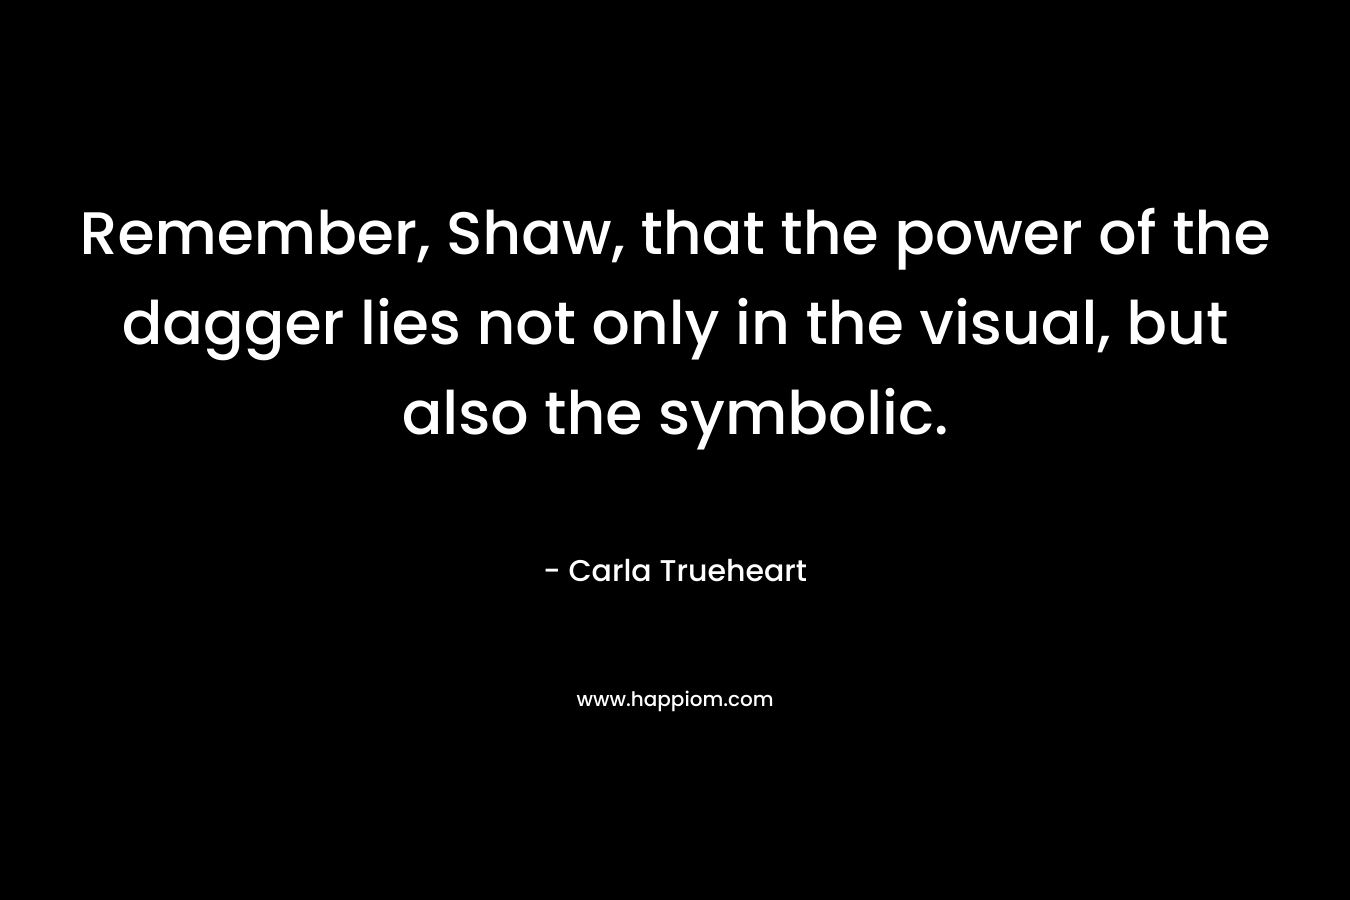 Remember, Shaw, that the power of the dagger lies not only in the visual, but also the symbolic. – Carla Trueheart